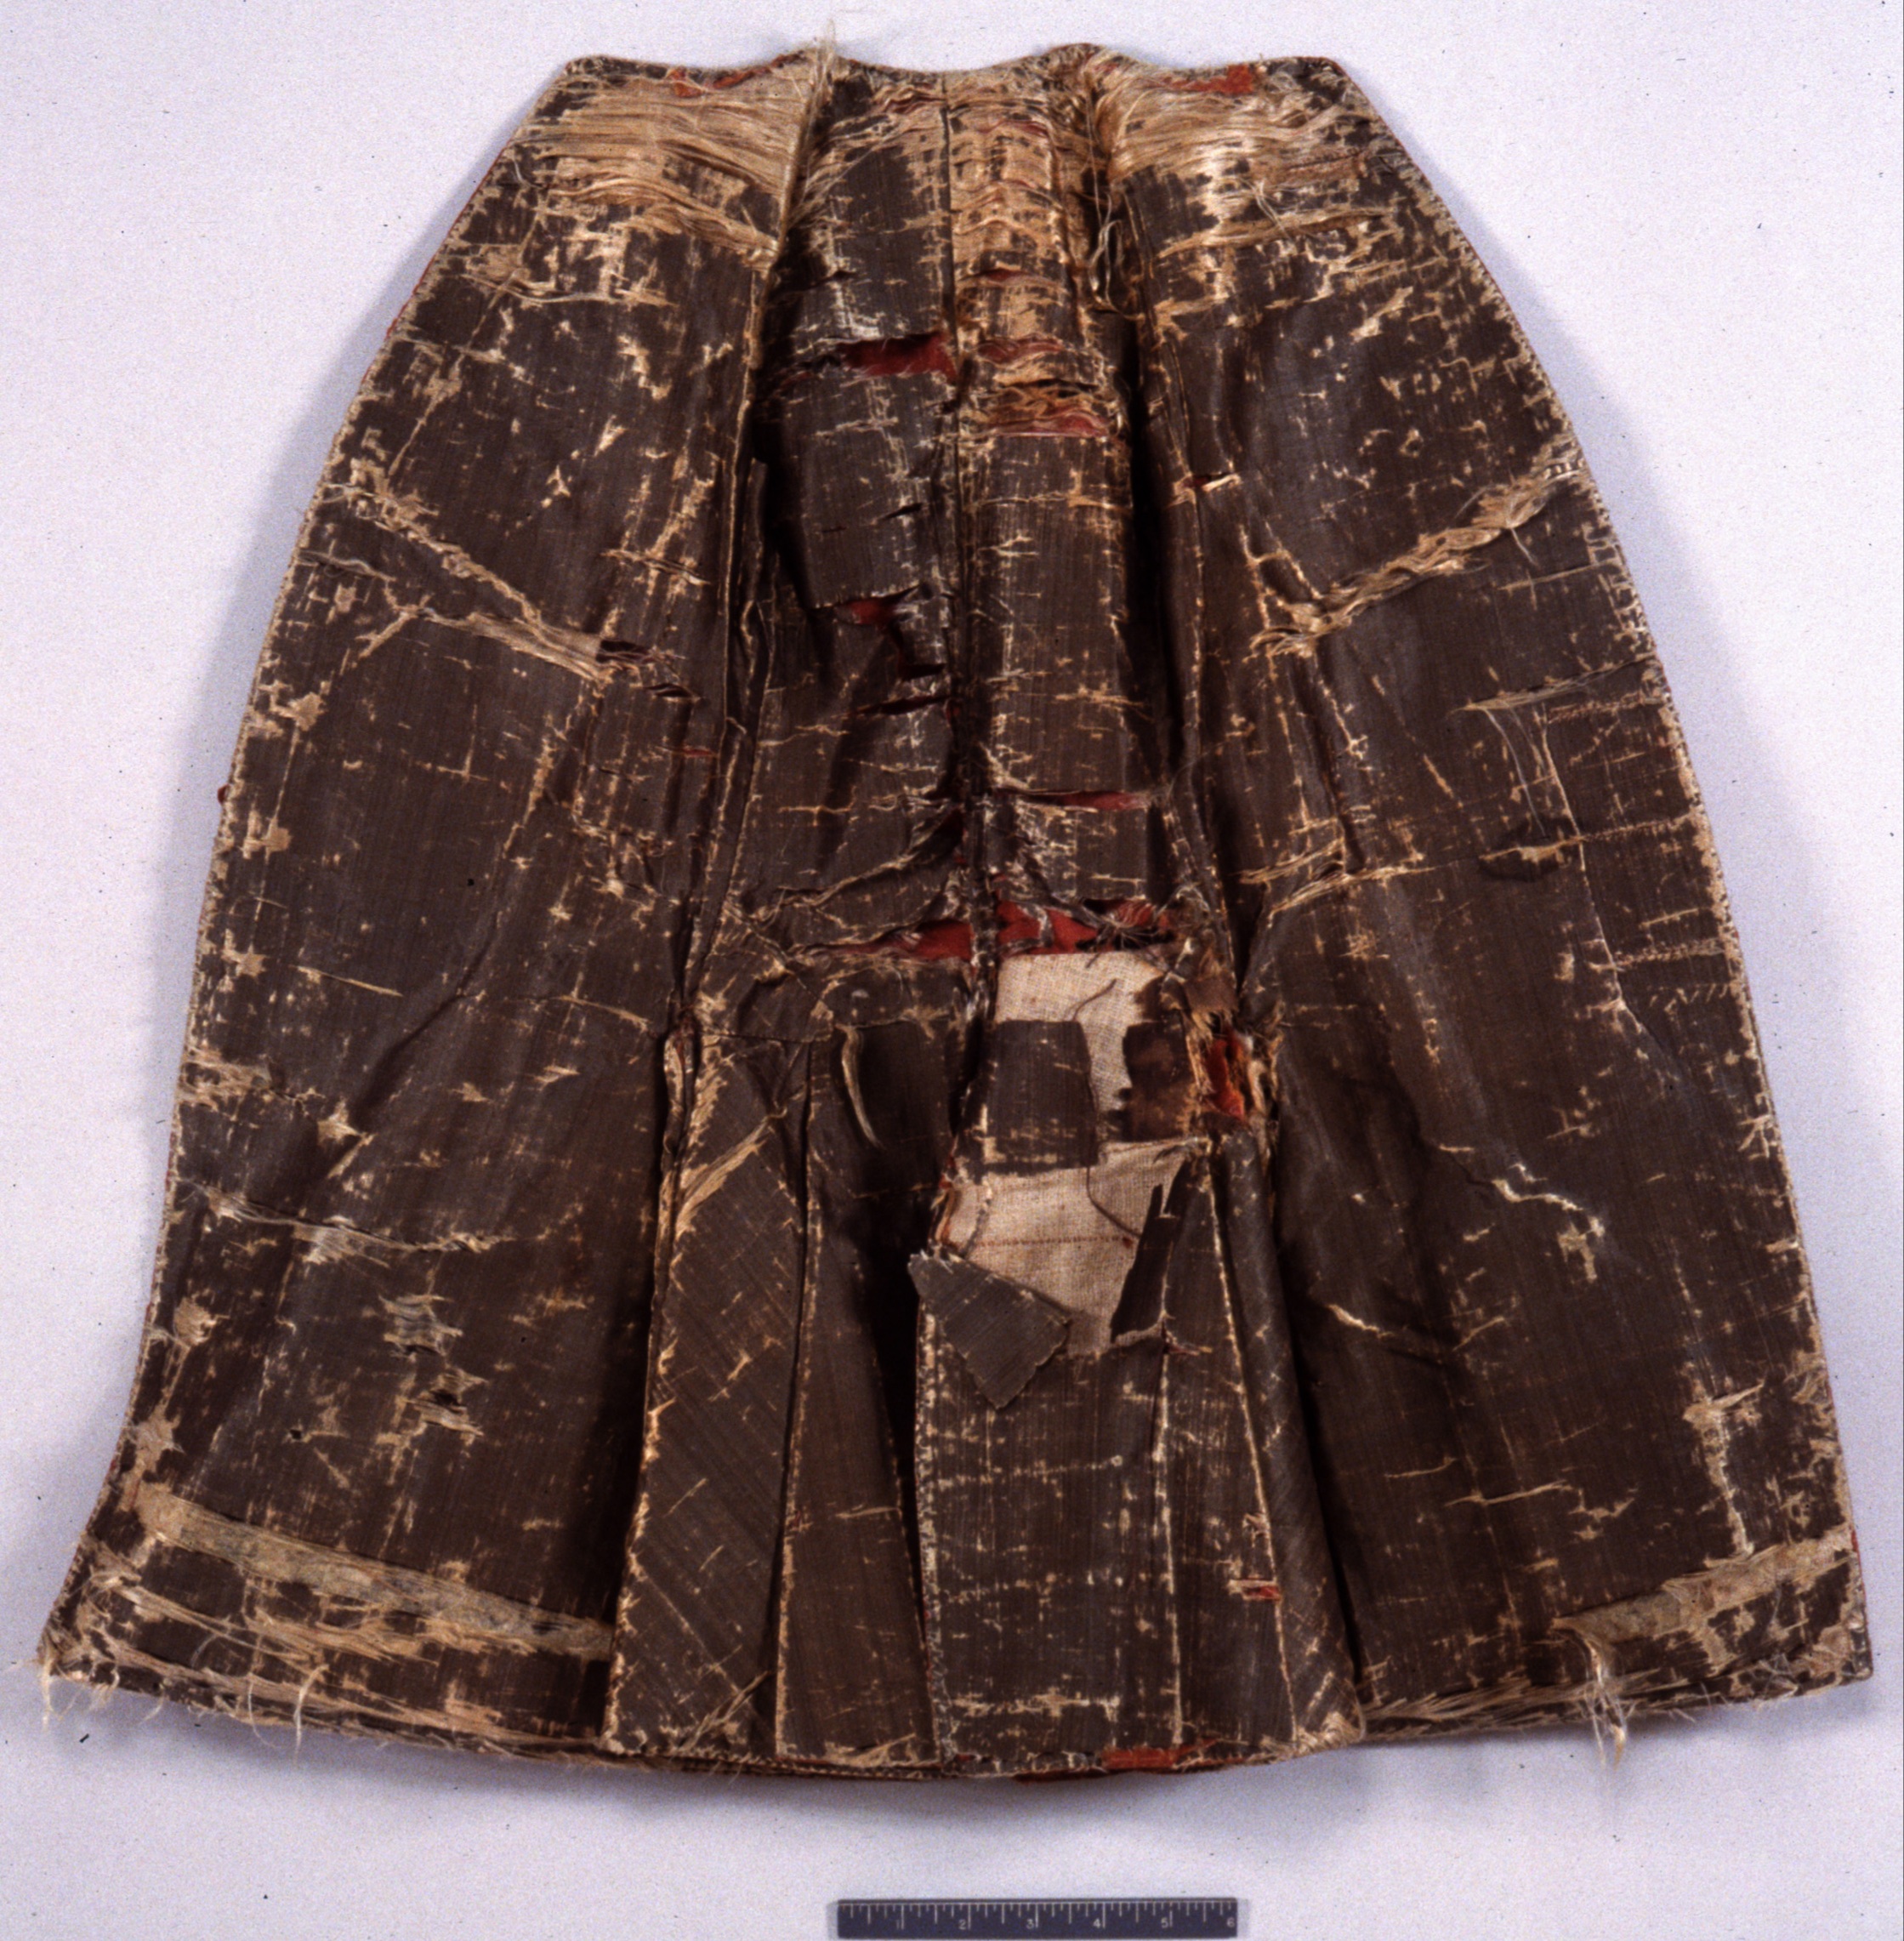 Boy's Coat (interior—before conservation), Italy, 1720–30, Los Angeles County Museum of Art, gift of Sanford and Mary Jane Bloom, photo by Catherine McLean